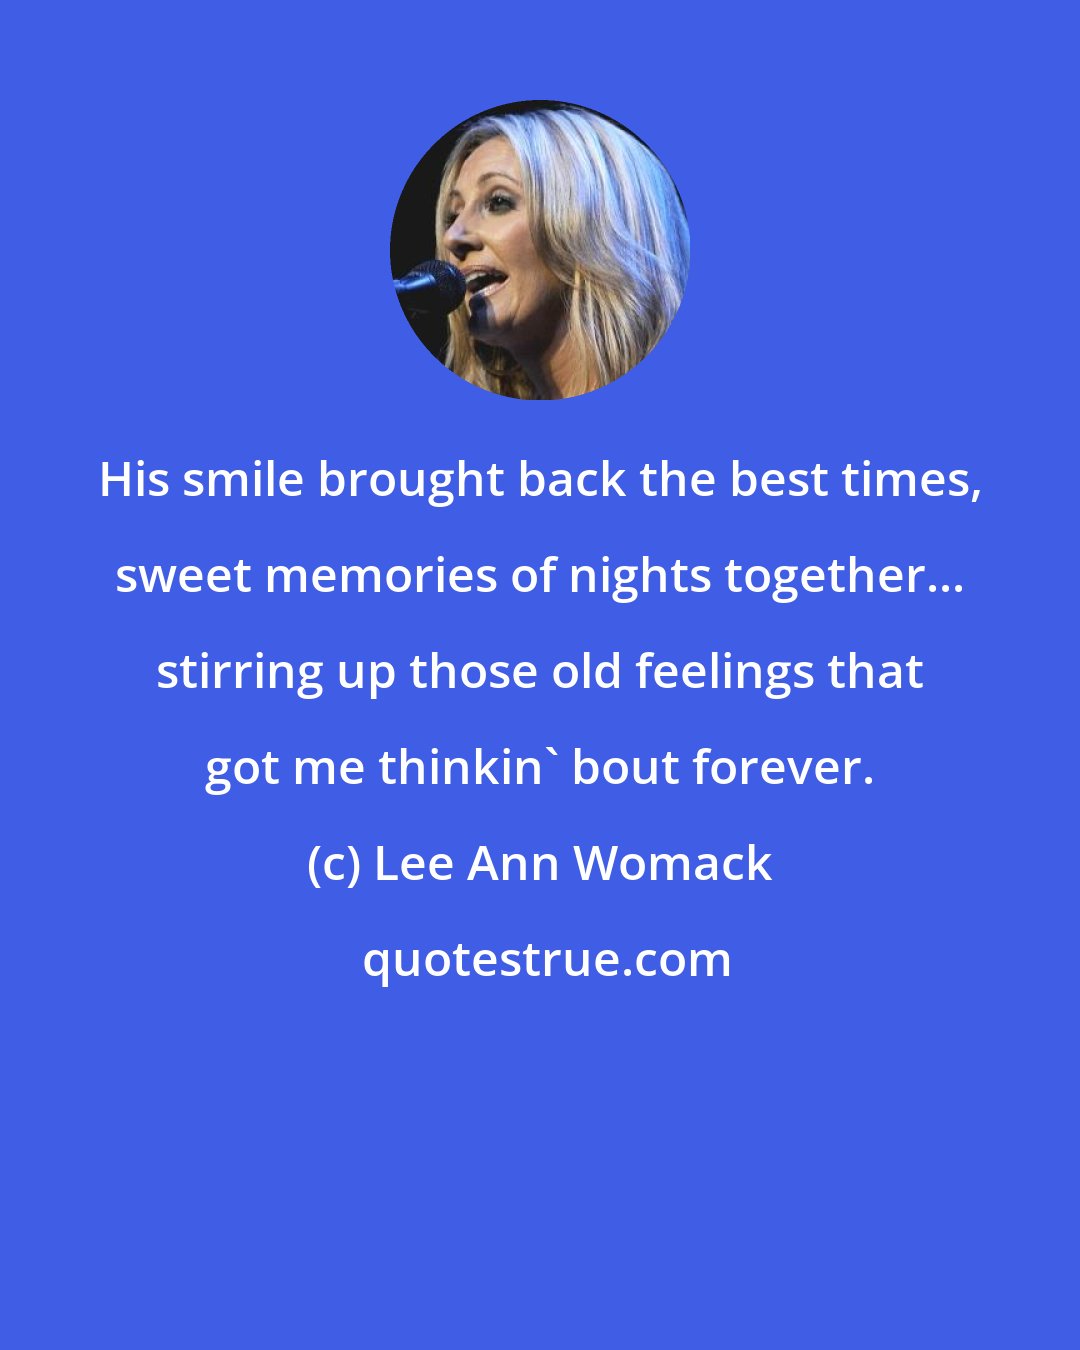 Lee Ann Womack: His smile brought back the best times, sweet memories of nights together... stirring up those old feelings that got me thinkin' bout forever.